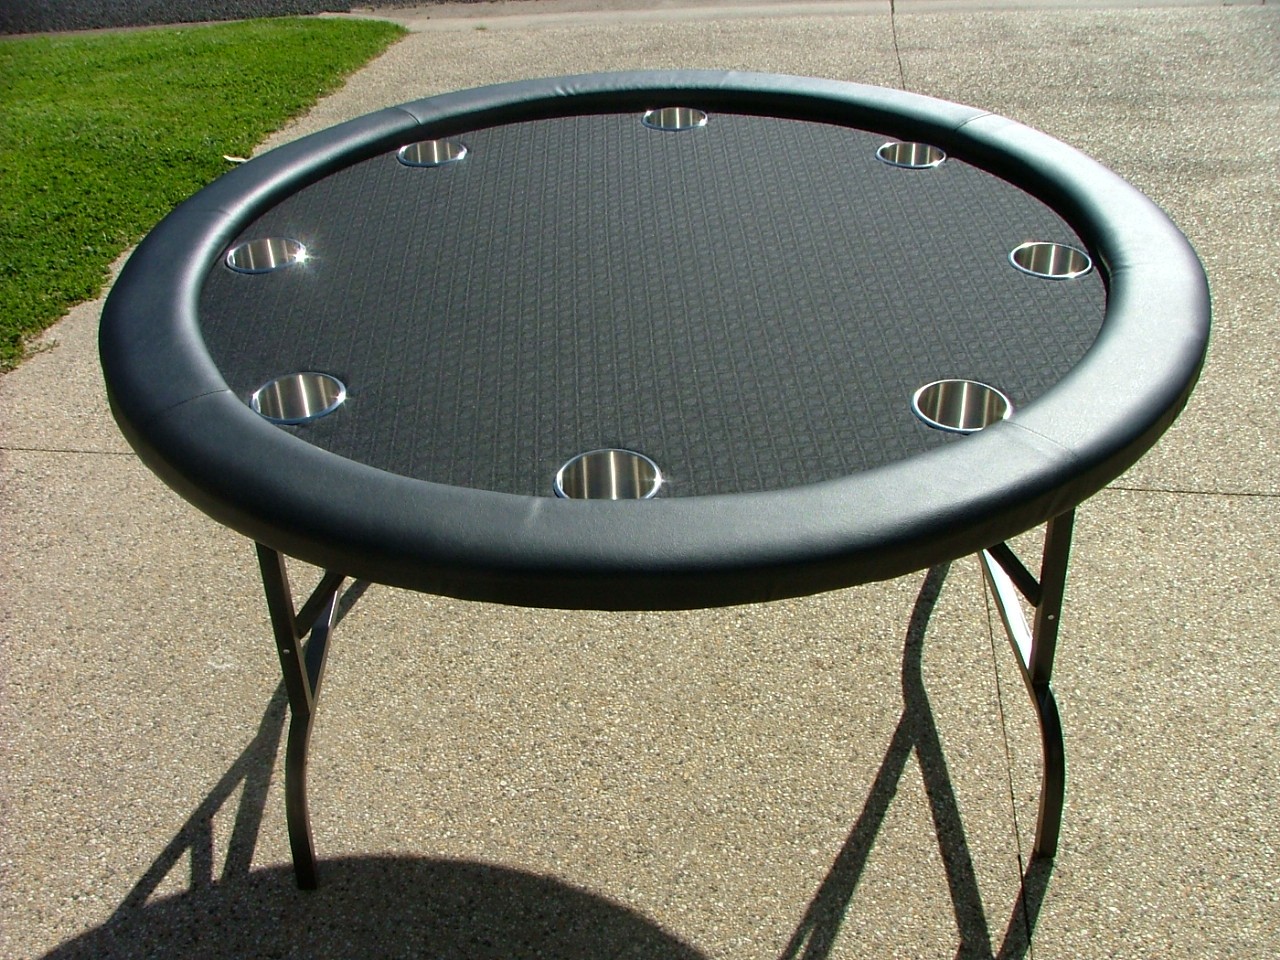 Premium 52" Round Black Suited Speed Cloth Poker Table w/ Stainless Steel Cups  - Min 20 Order